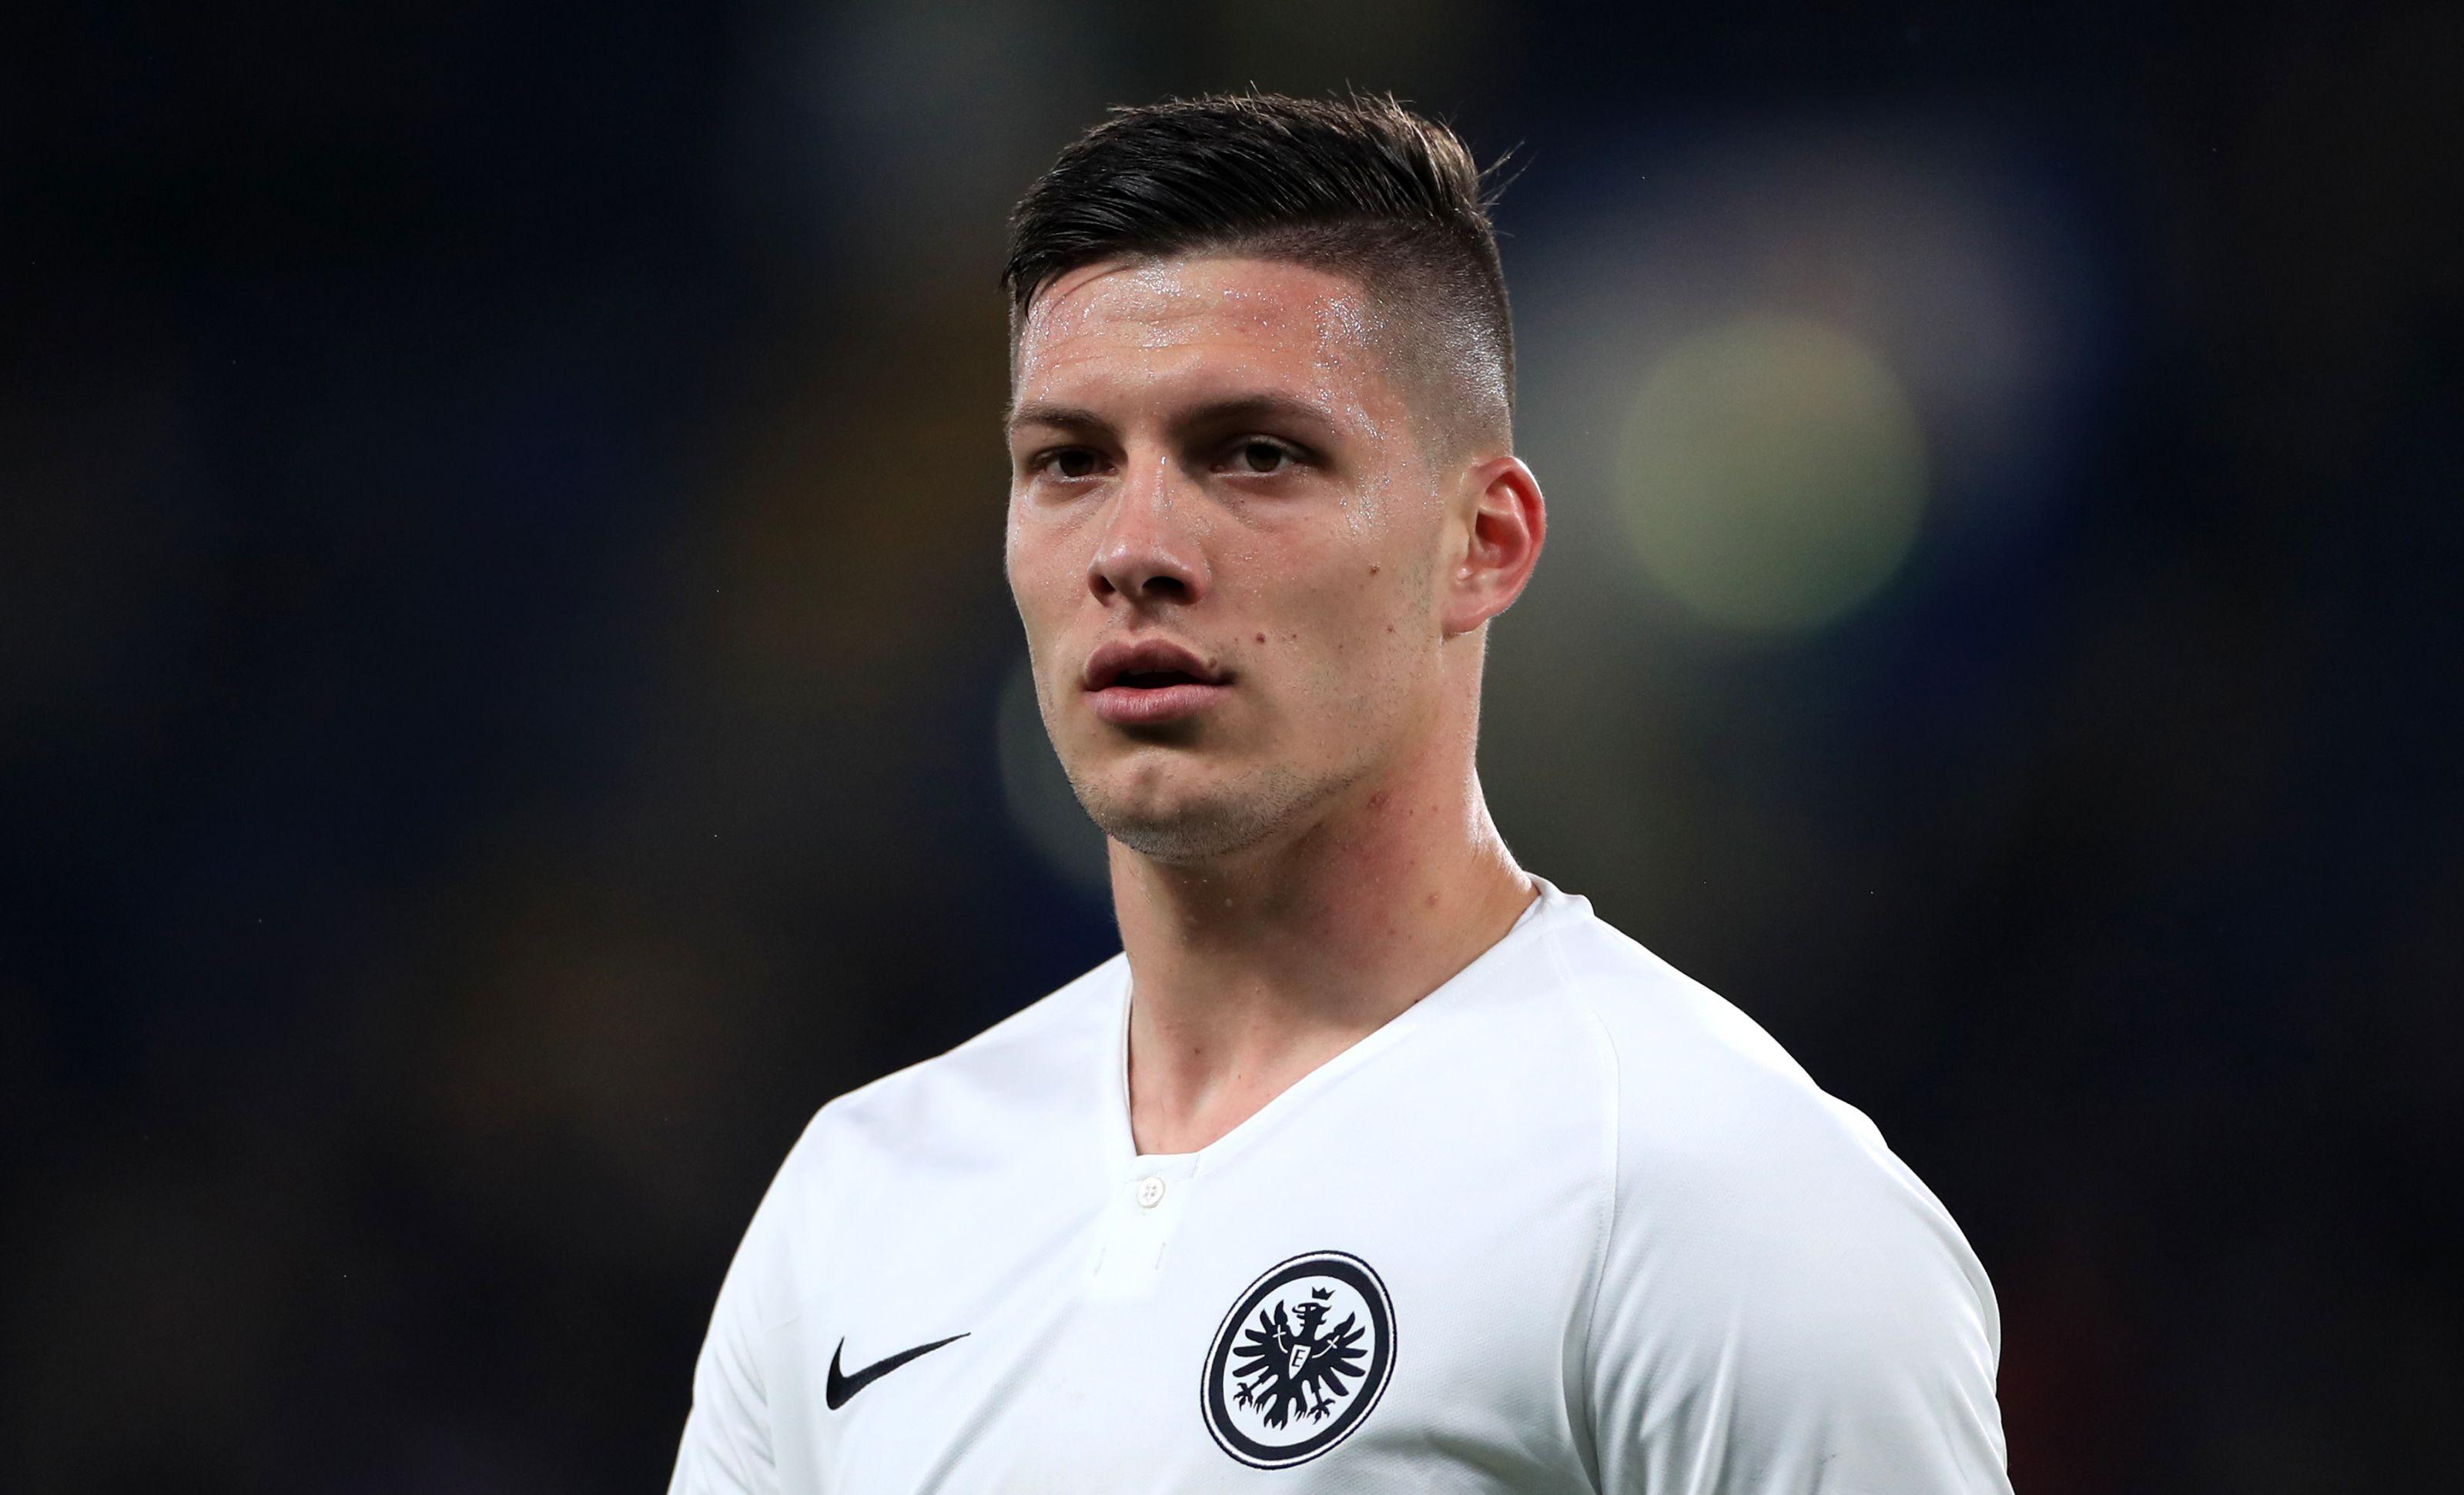 Real Madrid complete the signing of striker Luka Jovic